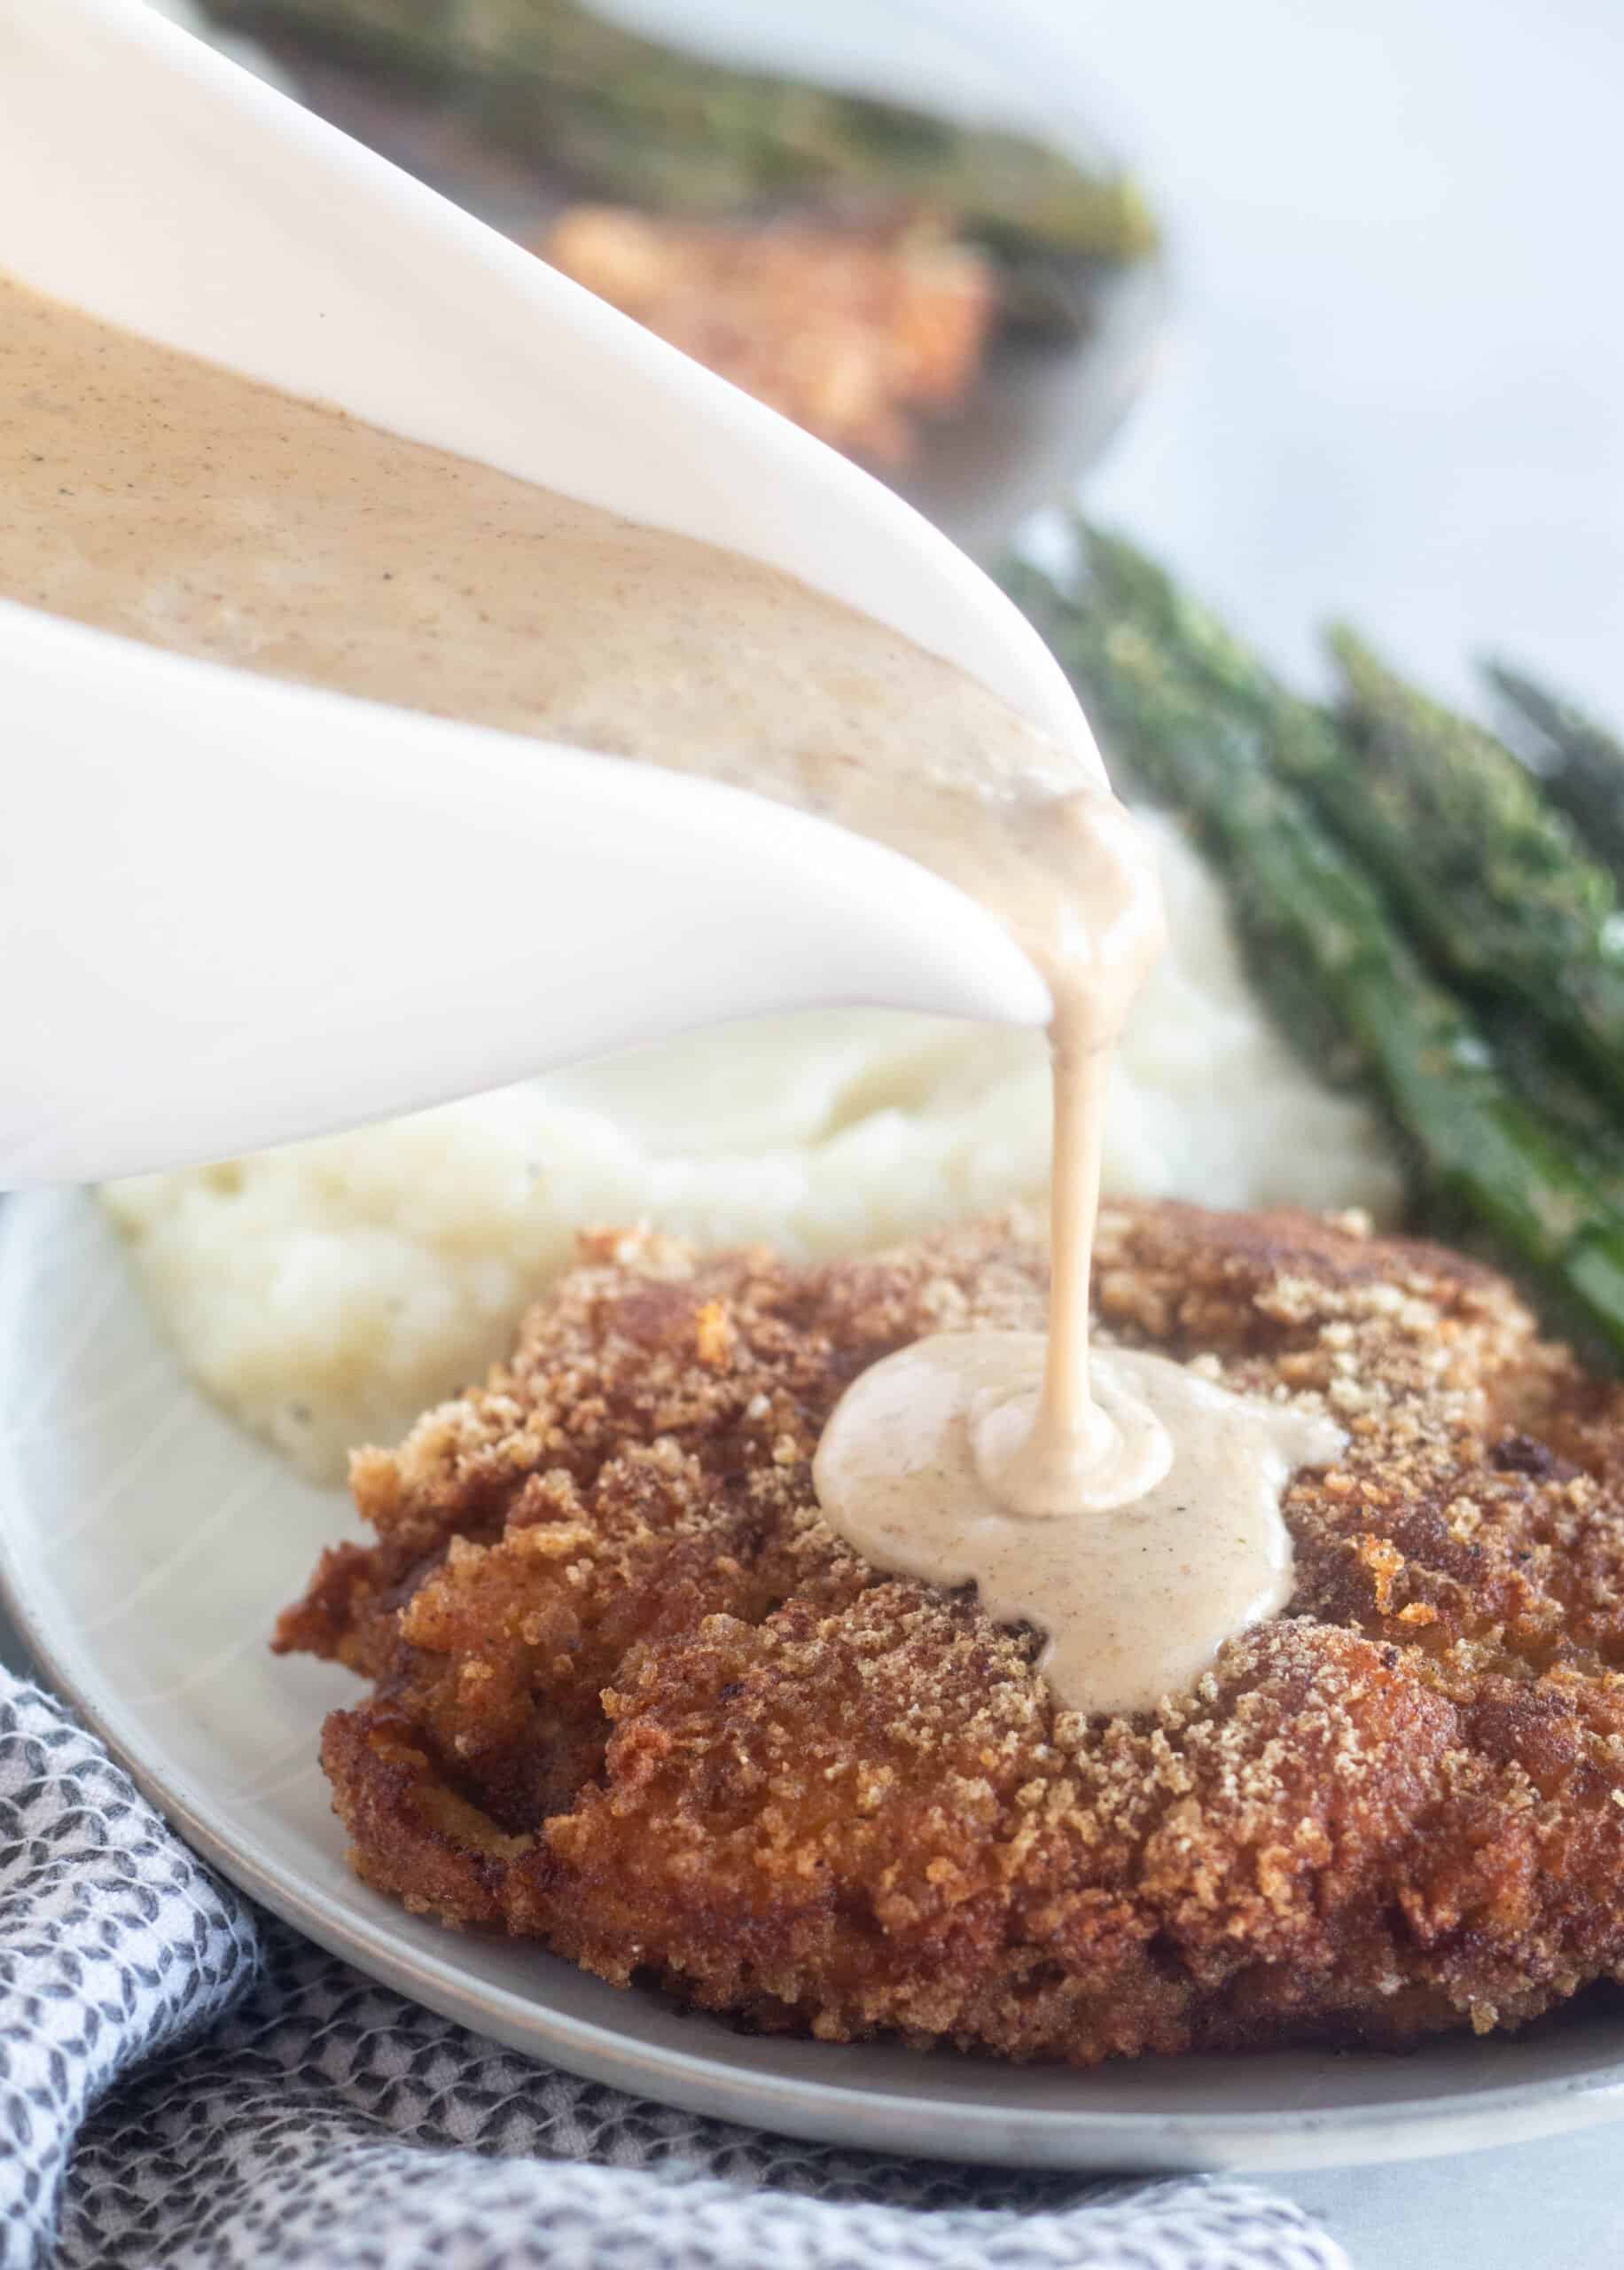 pouring gravy over the chicken fried steak.